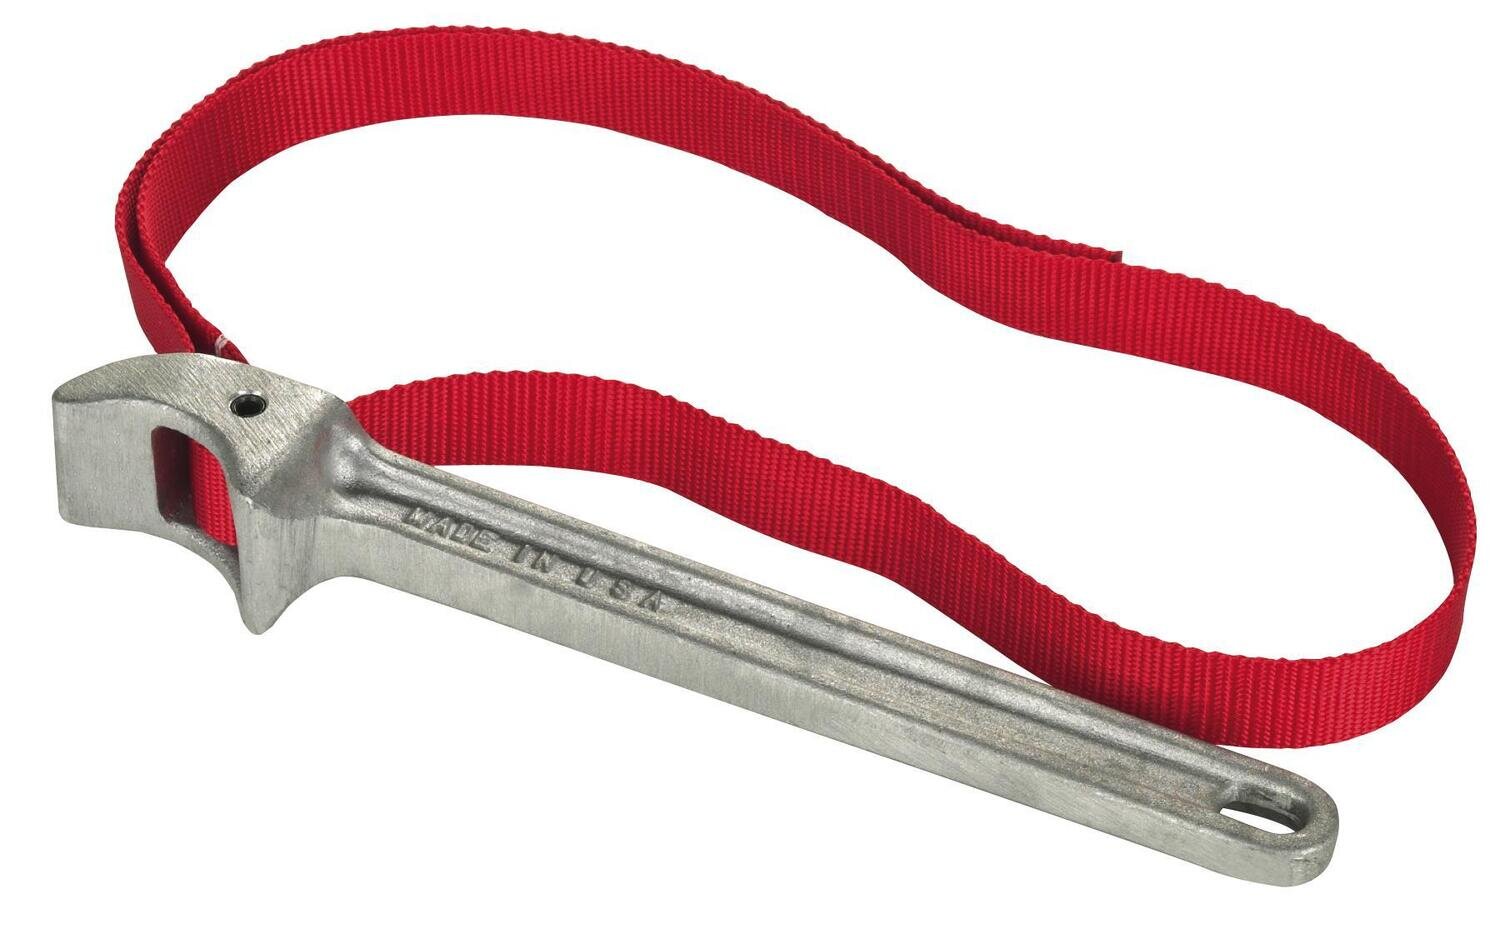 OW7206 - MP Strap Wrench